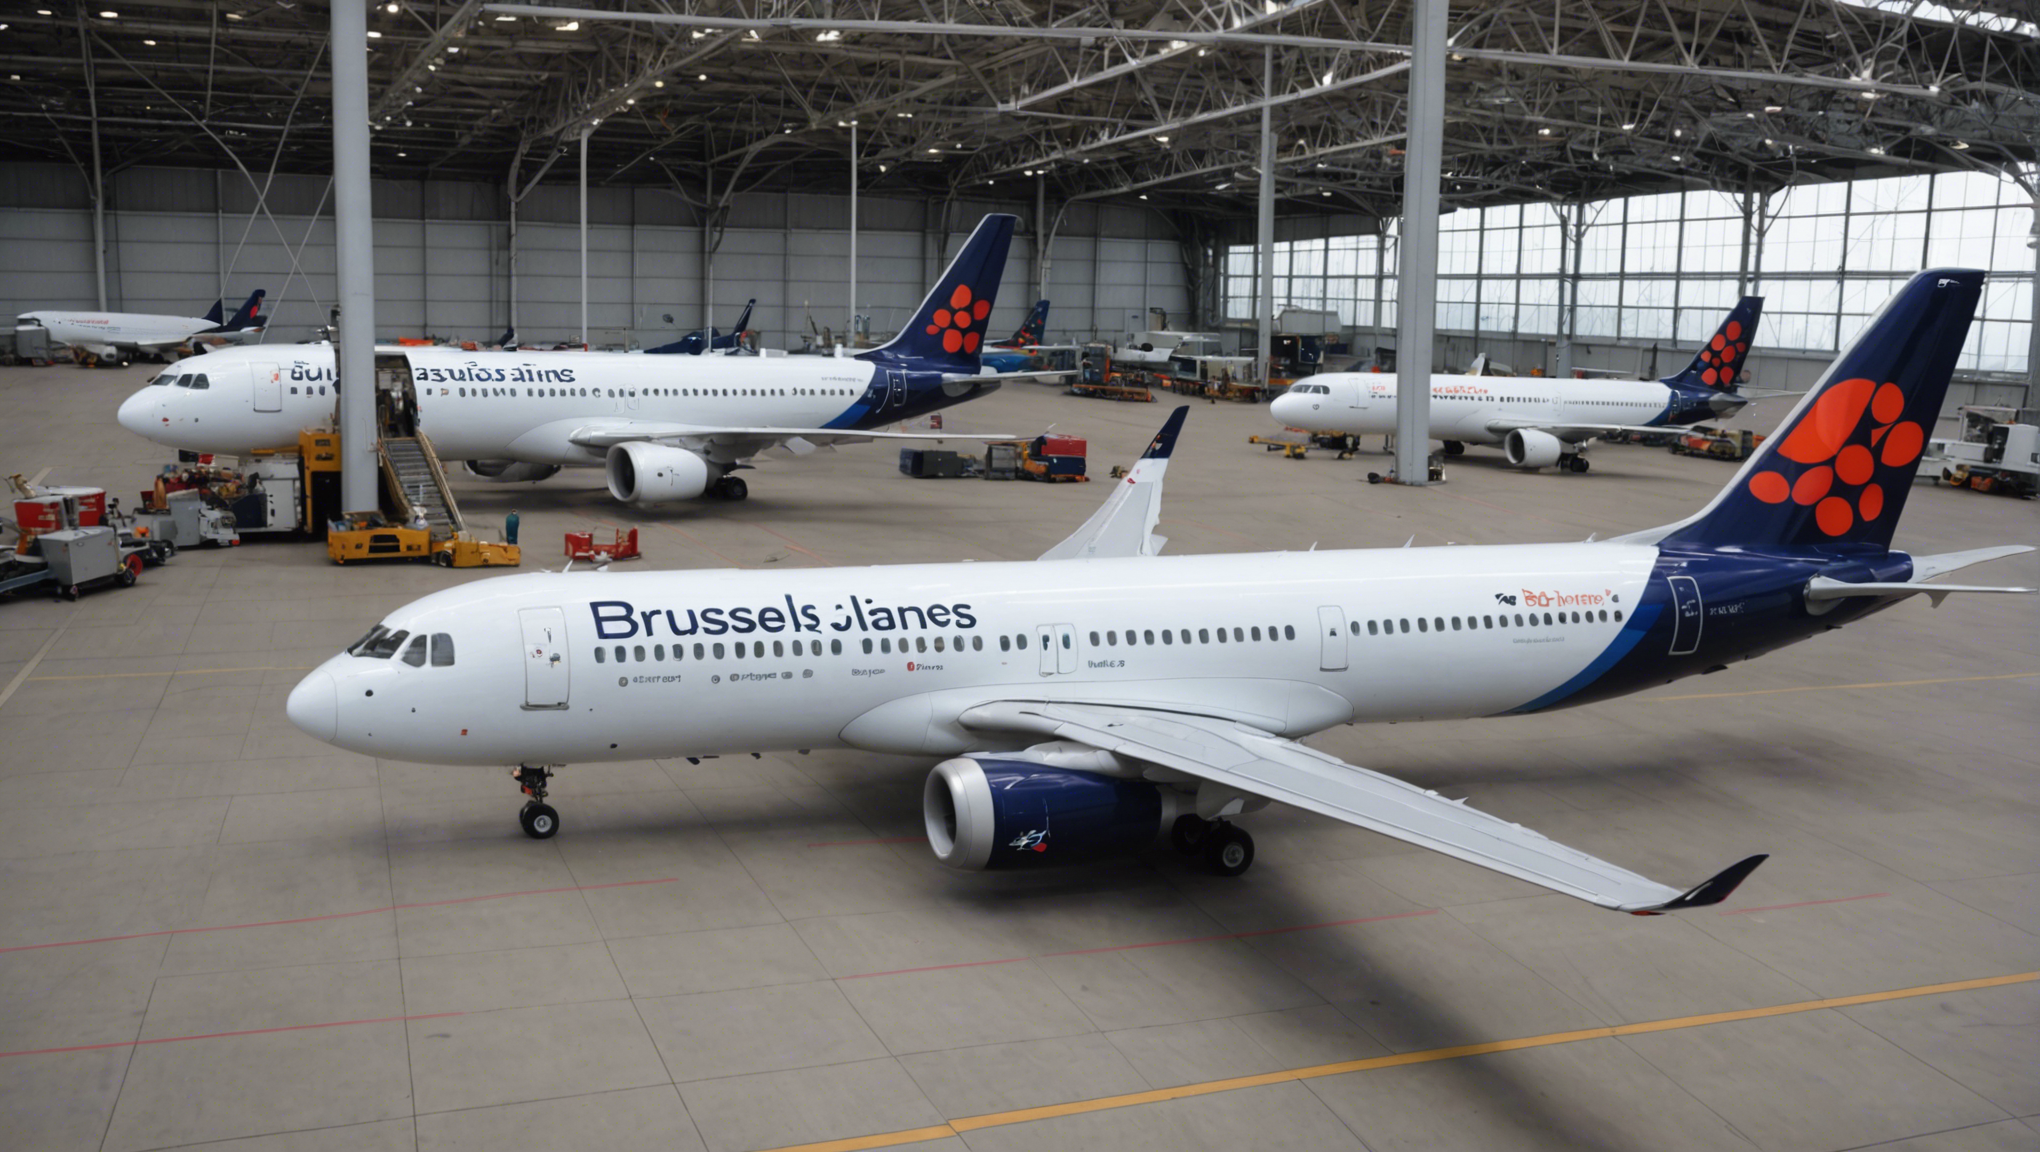 find out how brussels airlines is preparing to welcome 1.2 million international travelers over the summer period and guarantee an exceptional travel experience.